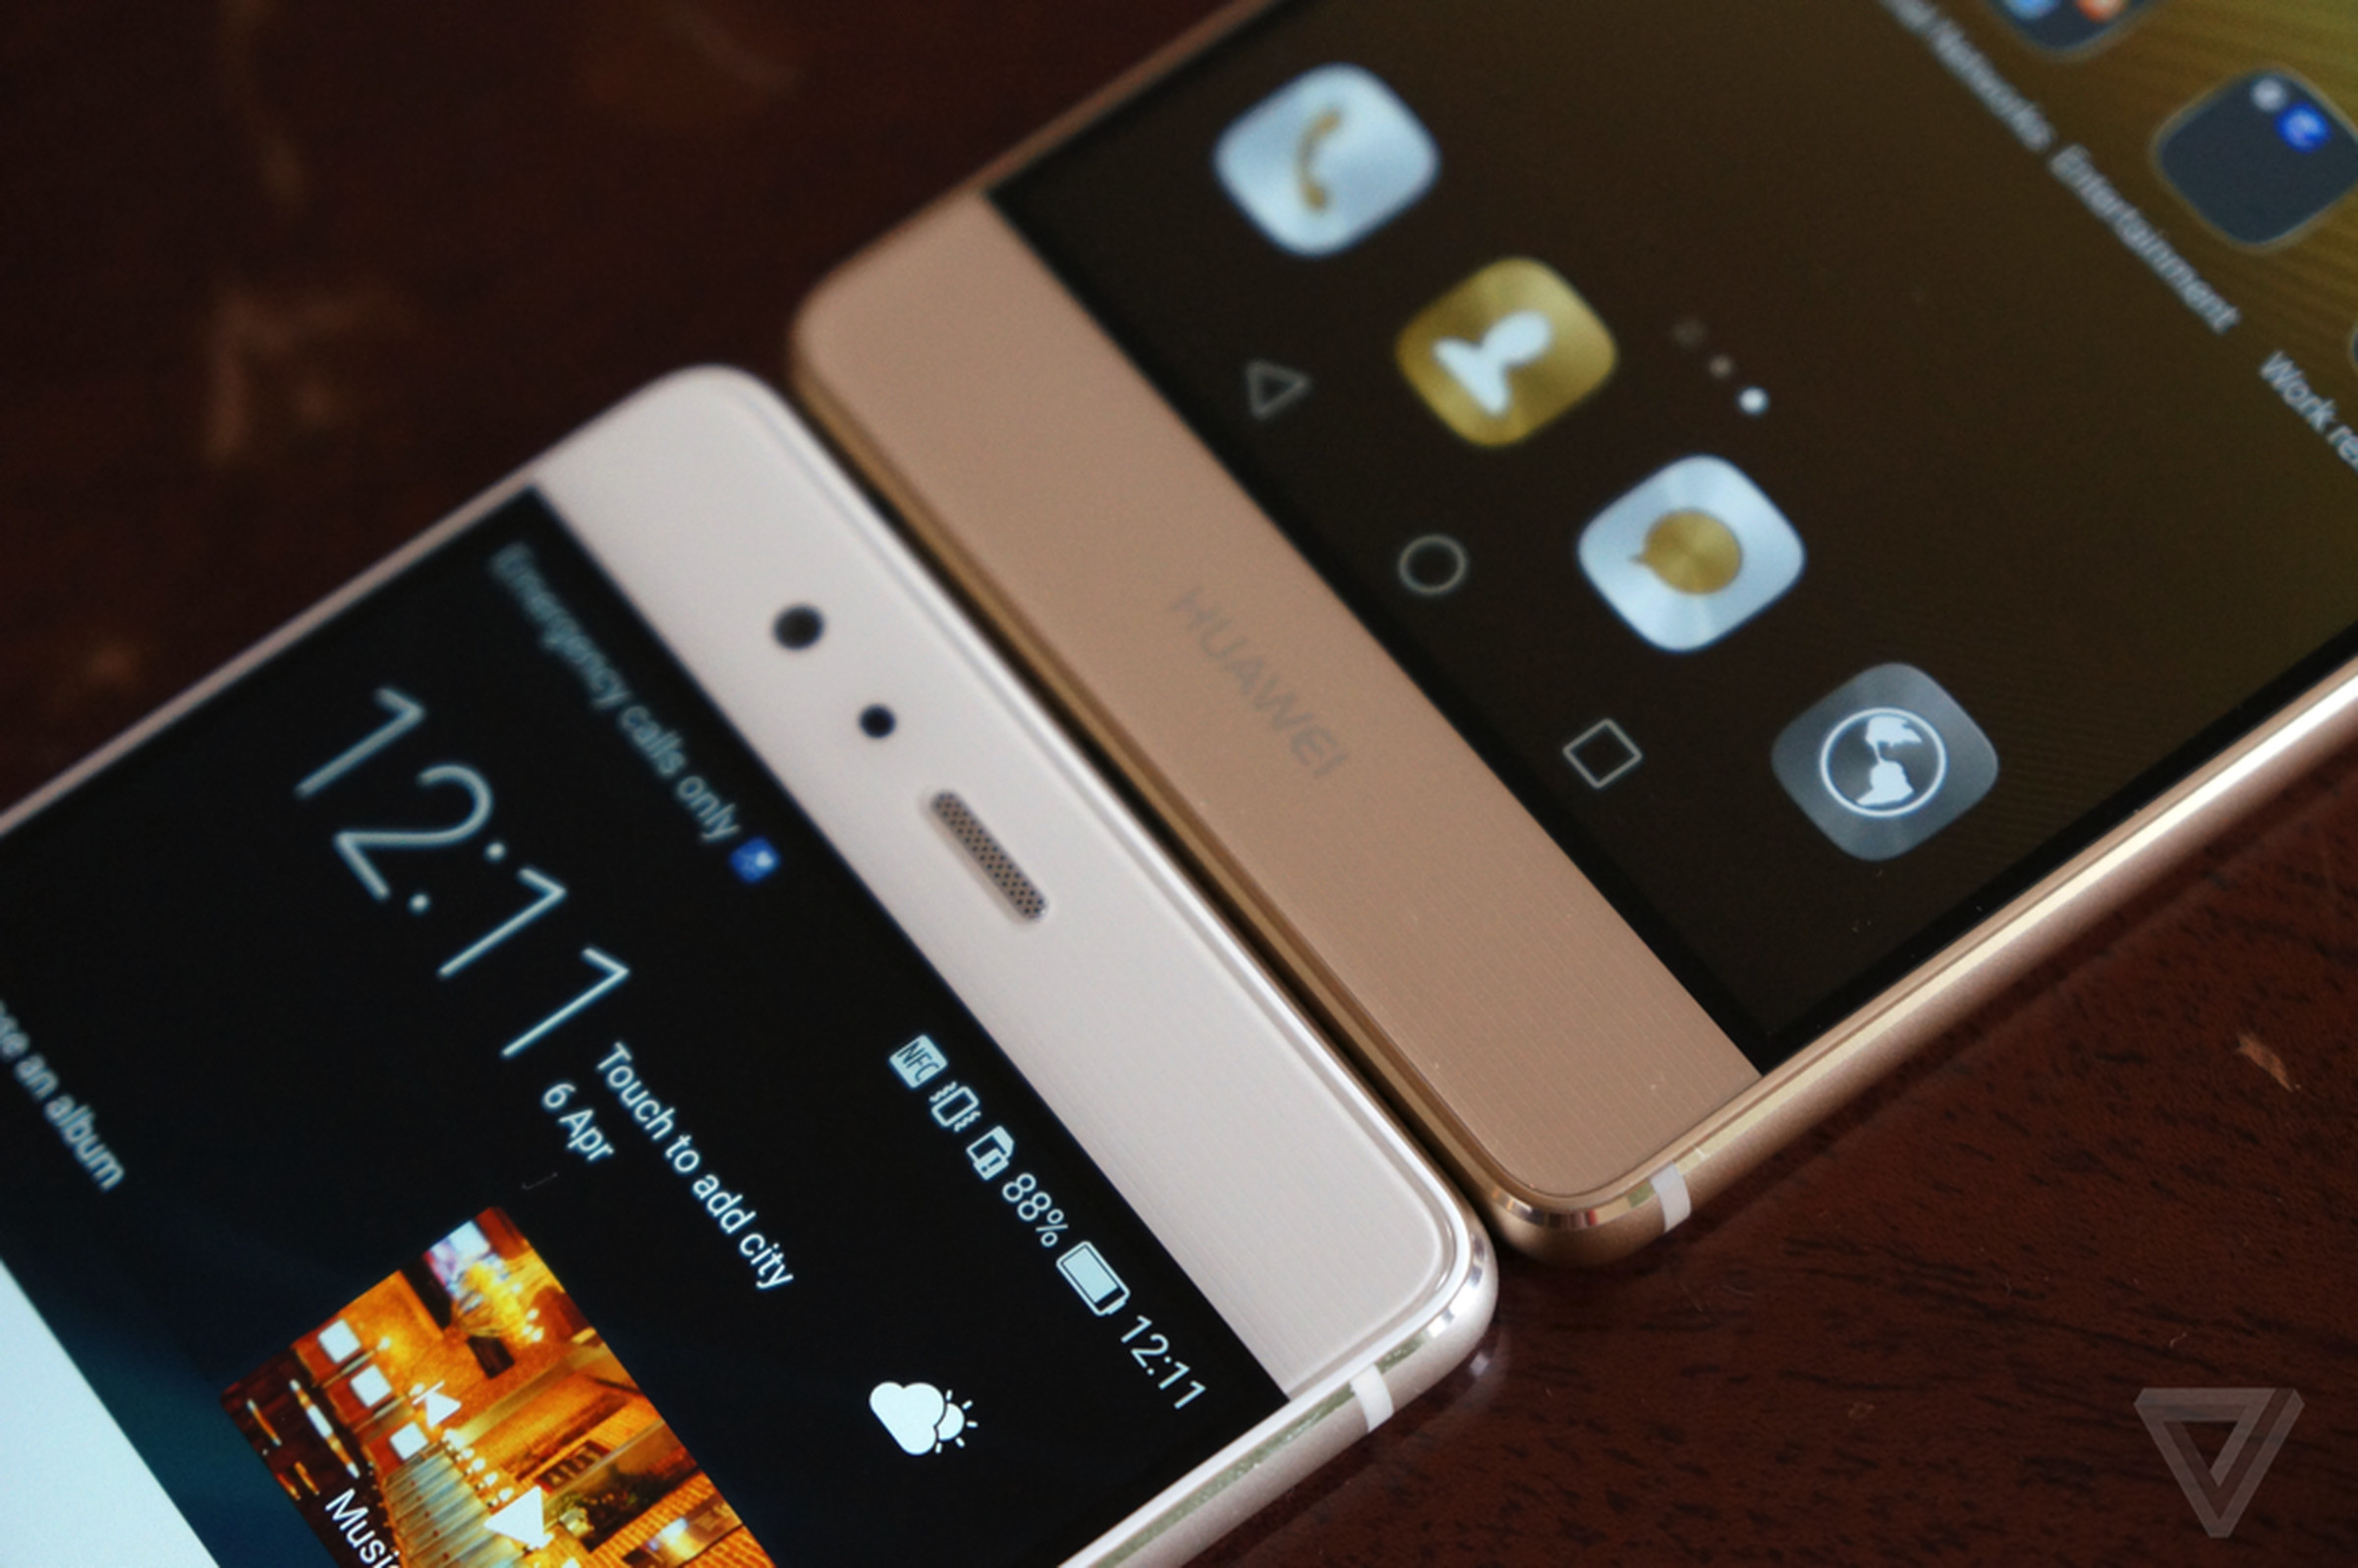 Huawei P9 hands-on gallery